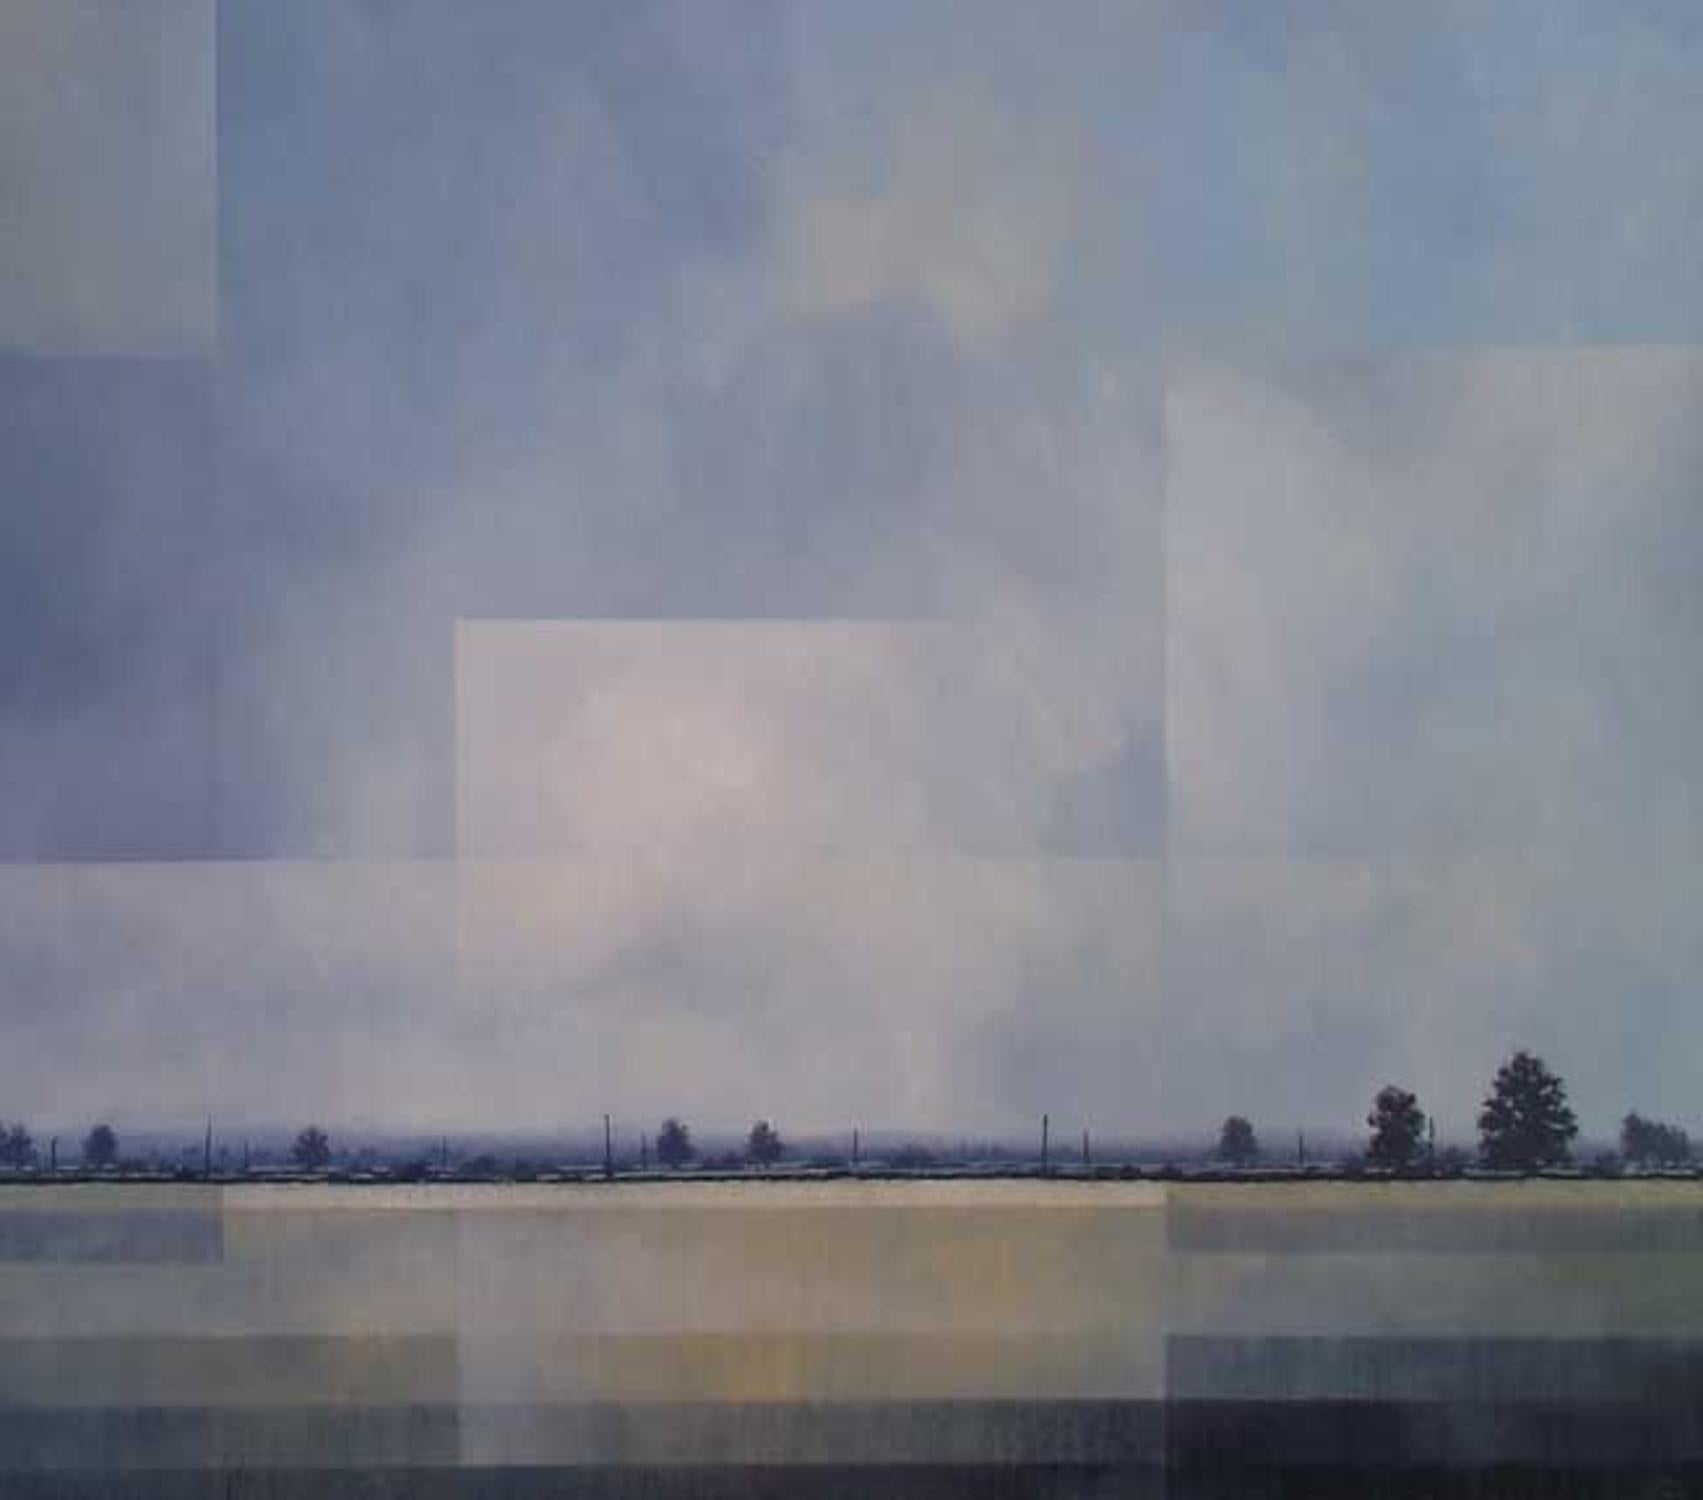 Tranquil Times - Contemporary British Countryside: Oil on Canvas - Gray Landscape Painting by Glynne James